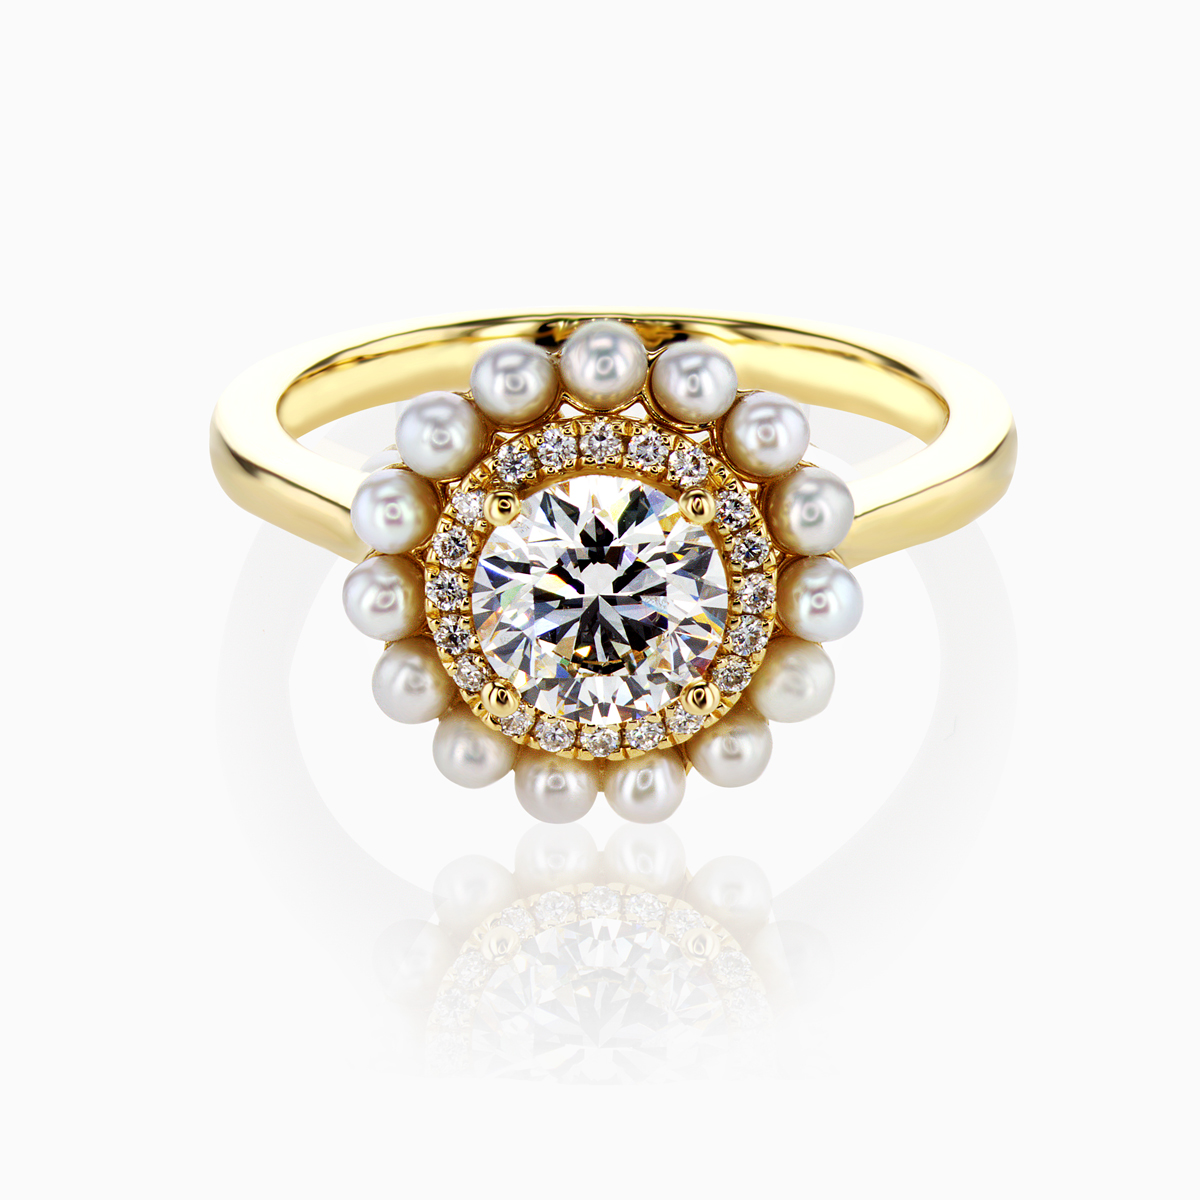 1-carat Lab-Grown Diamond & Pearl Halo Engagement Ring in 18k Yellow Gold